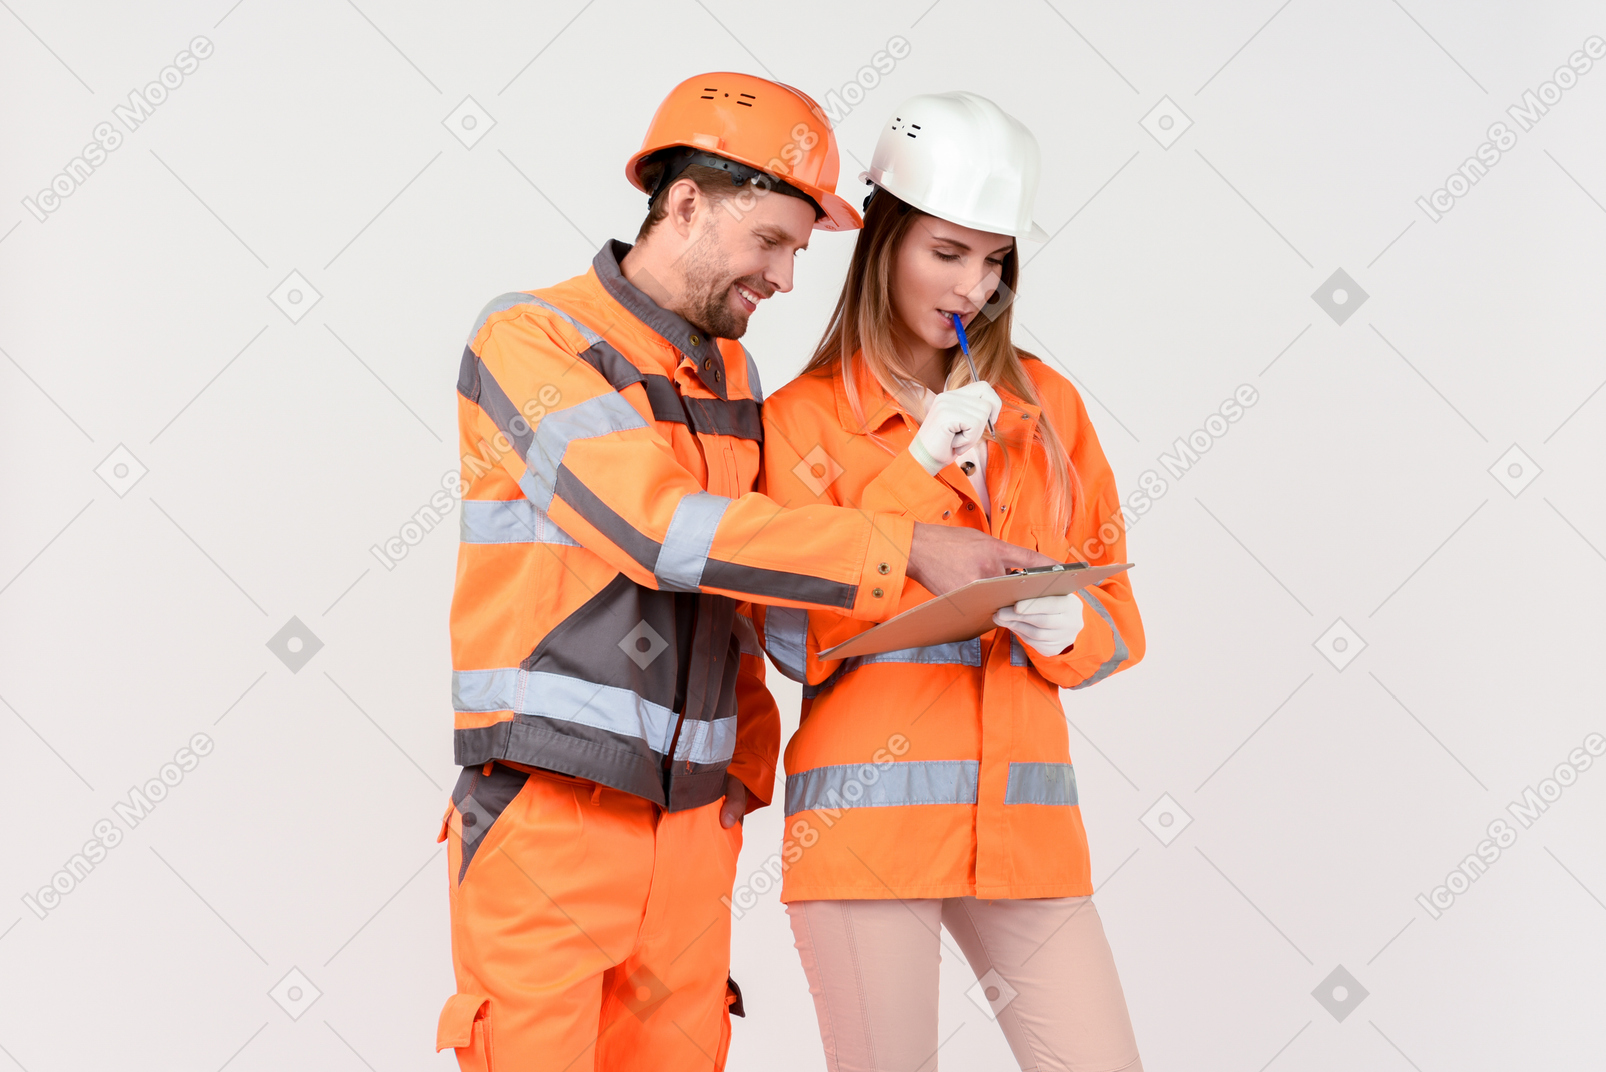 Female and male street workers looking at file and discussing it